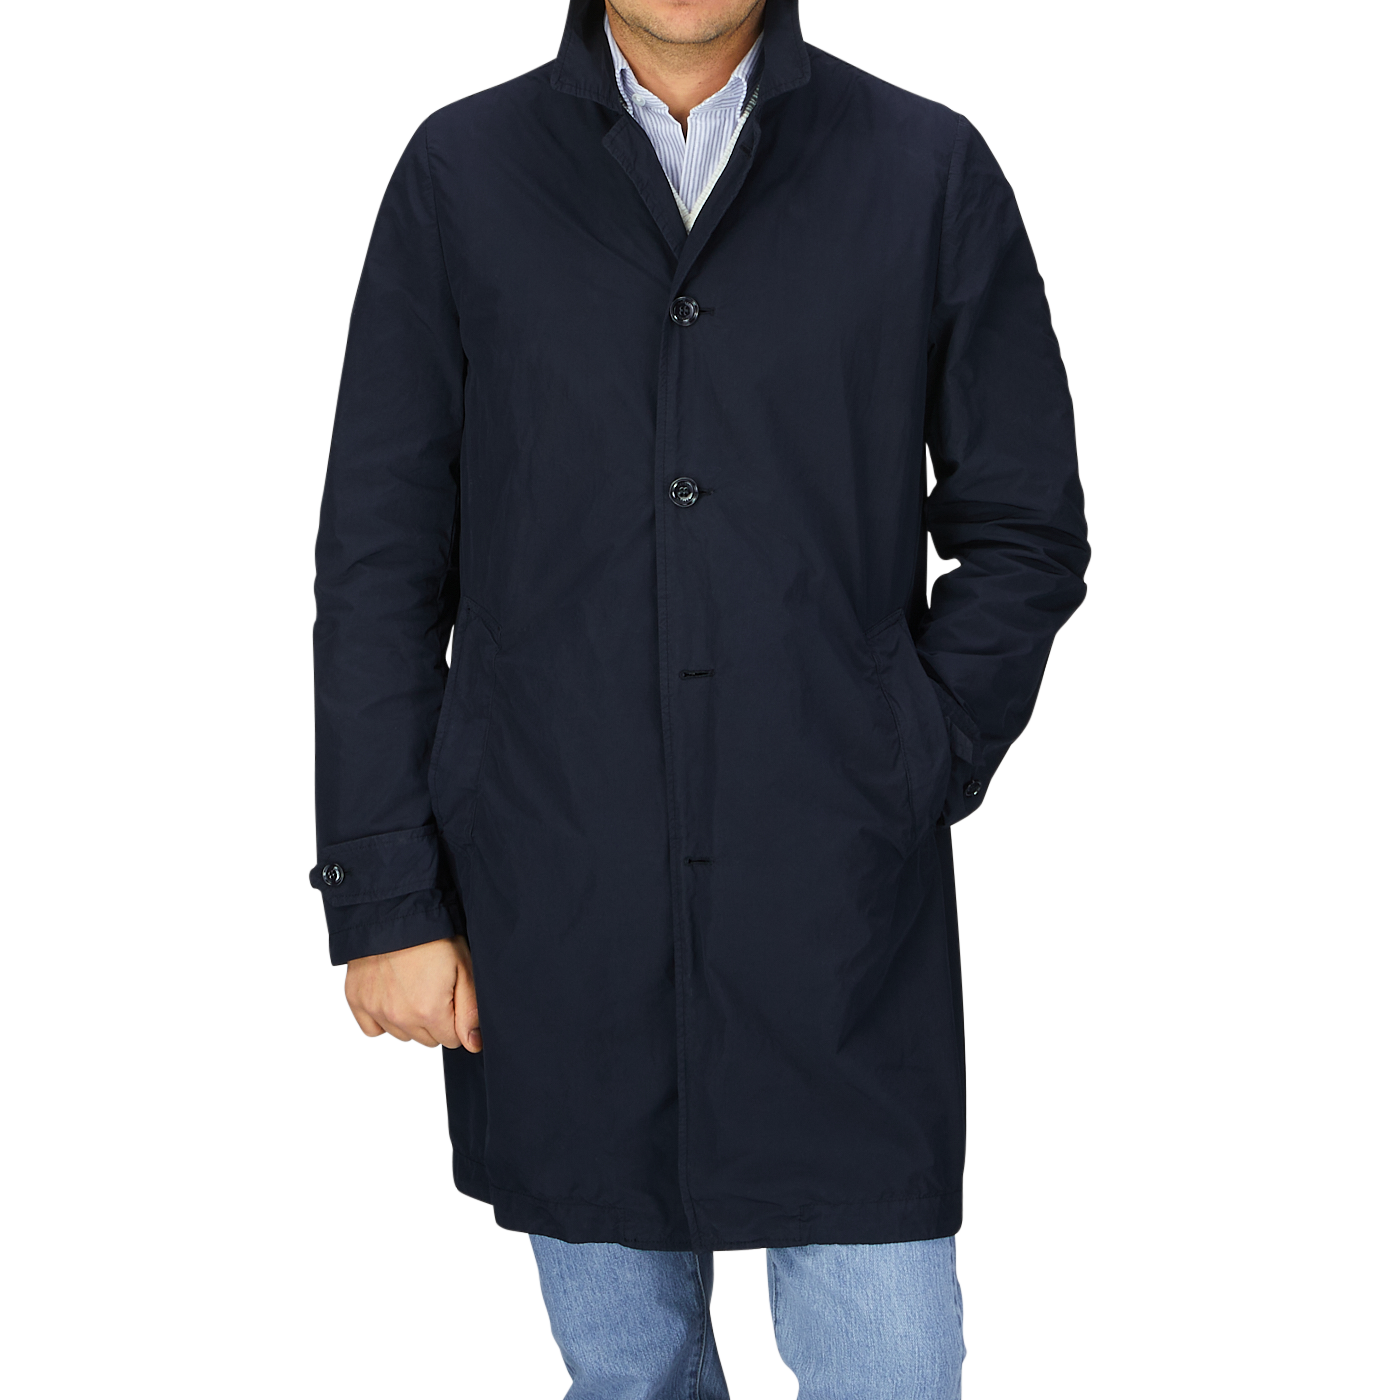 A man wearing a Navy Blue Micro Nylon Limone trench coat by Aspesi.